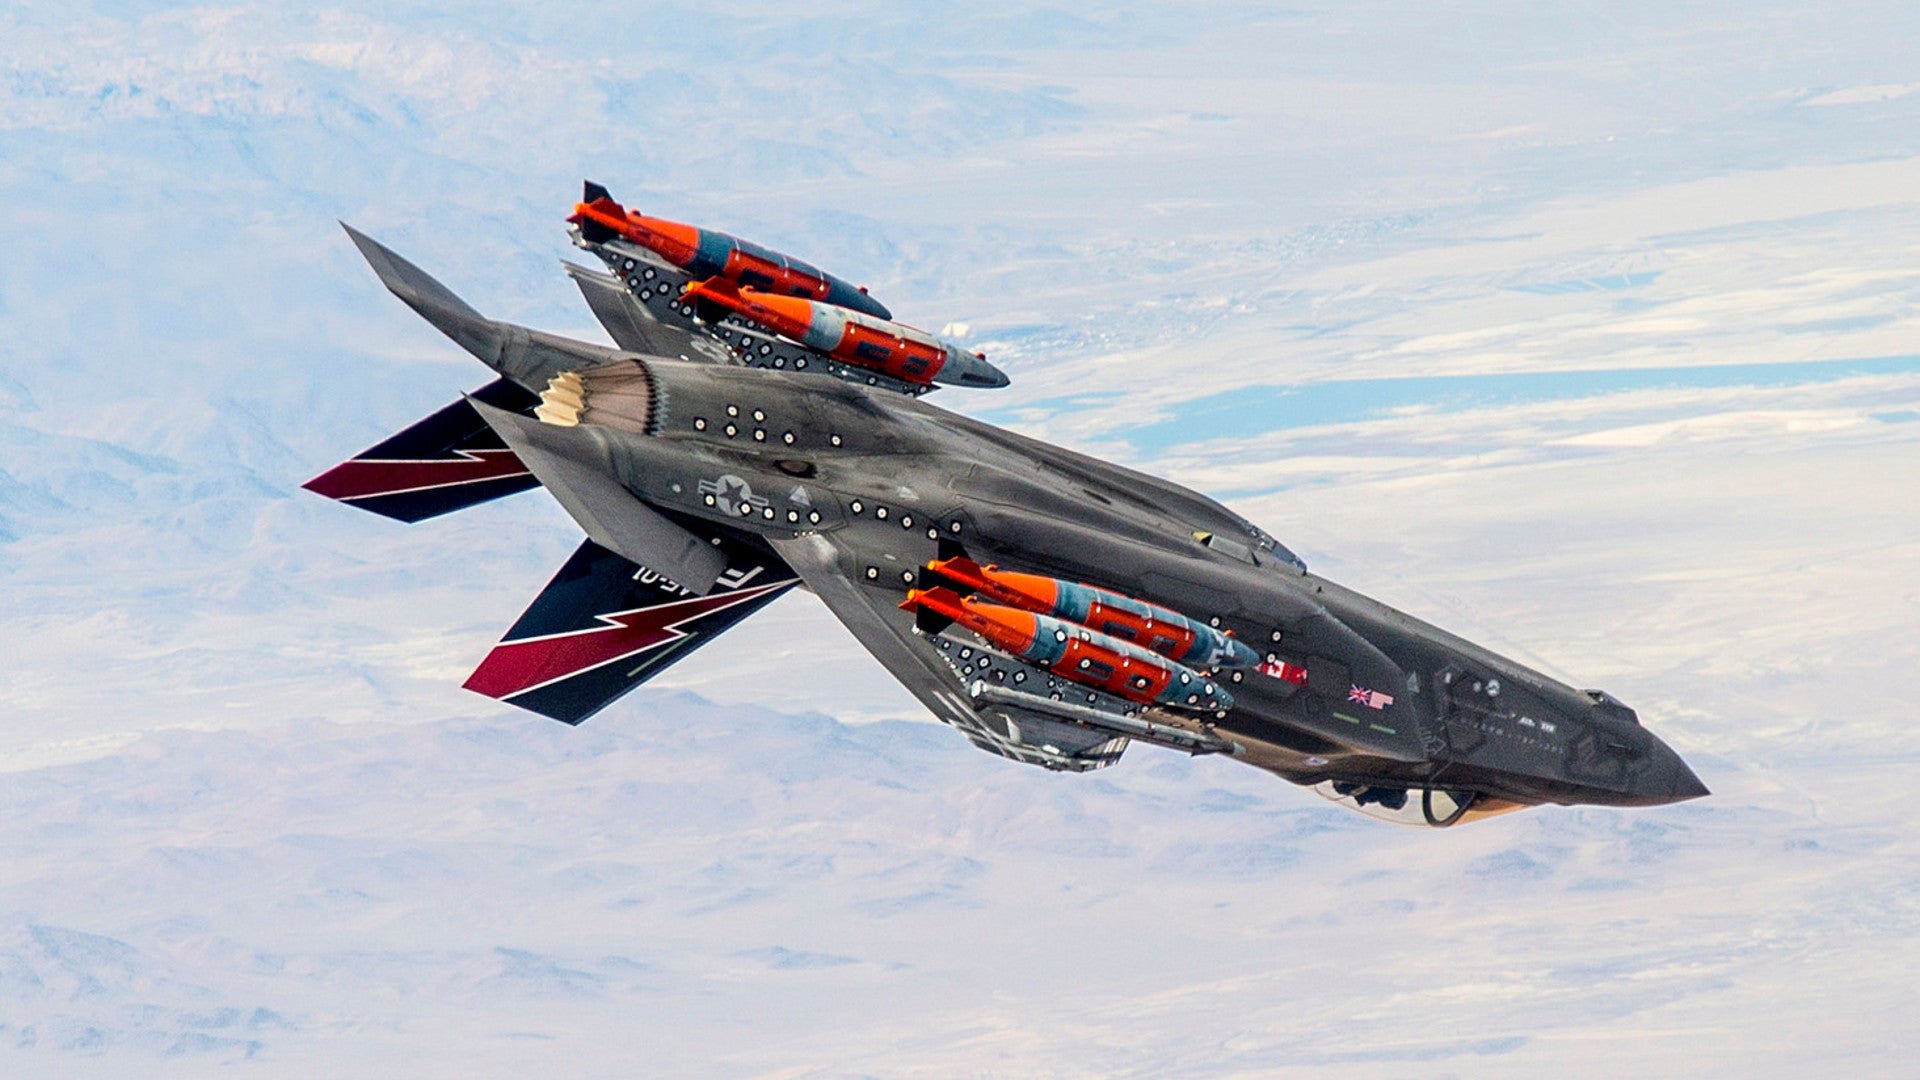 Let’s Talk About The USAF’s Claim Of ‘Fully Combat Capable’ F-35s